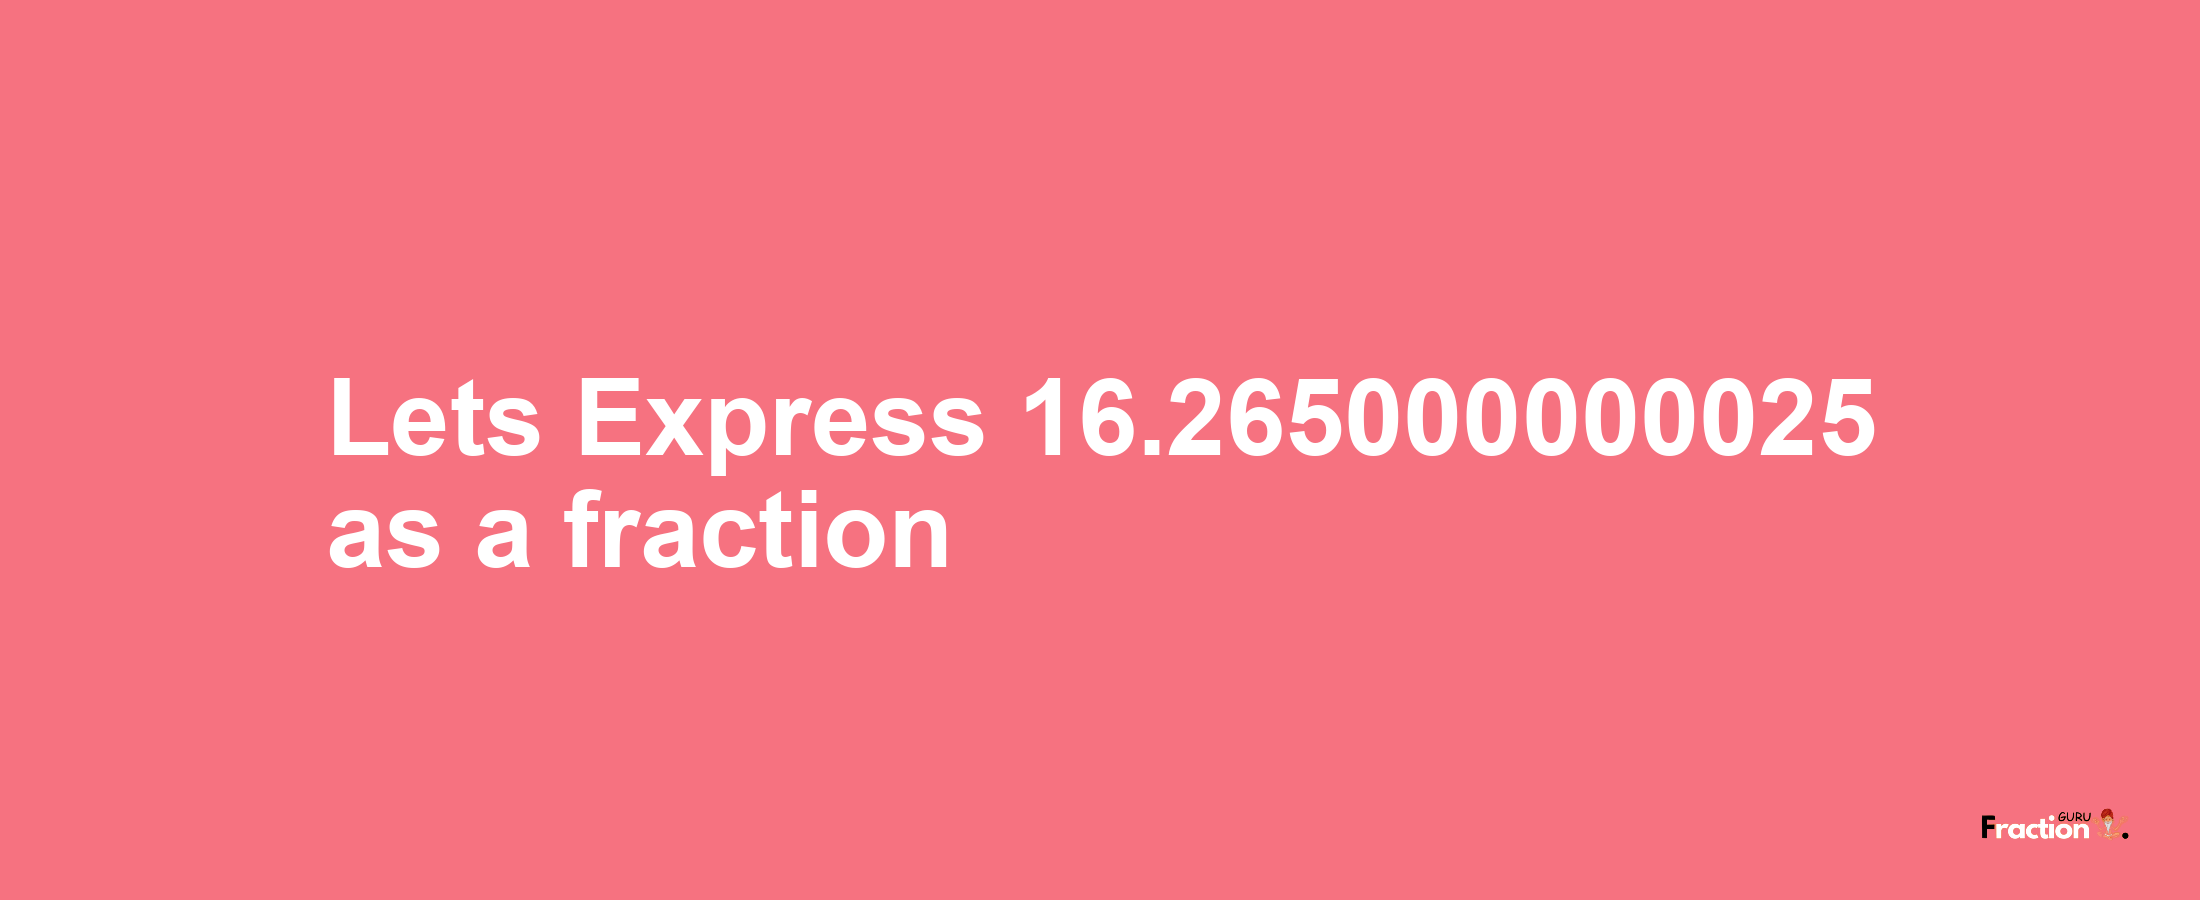 Lets Express 16.265000000025 as afraction